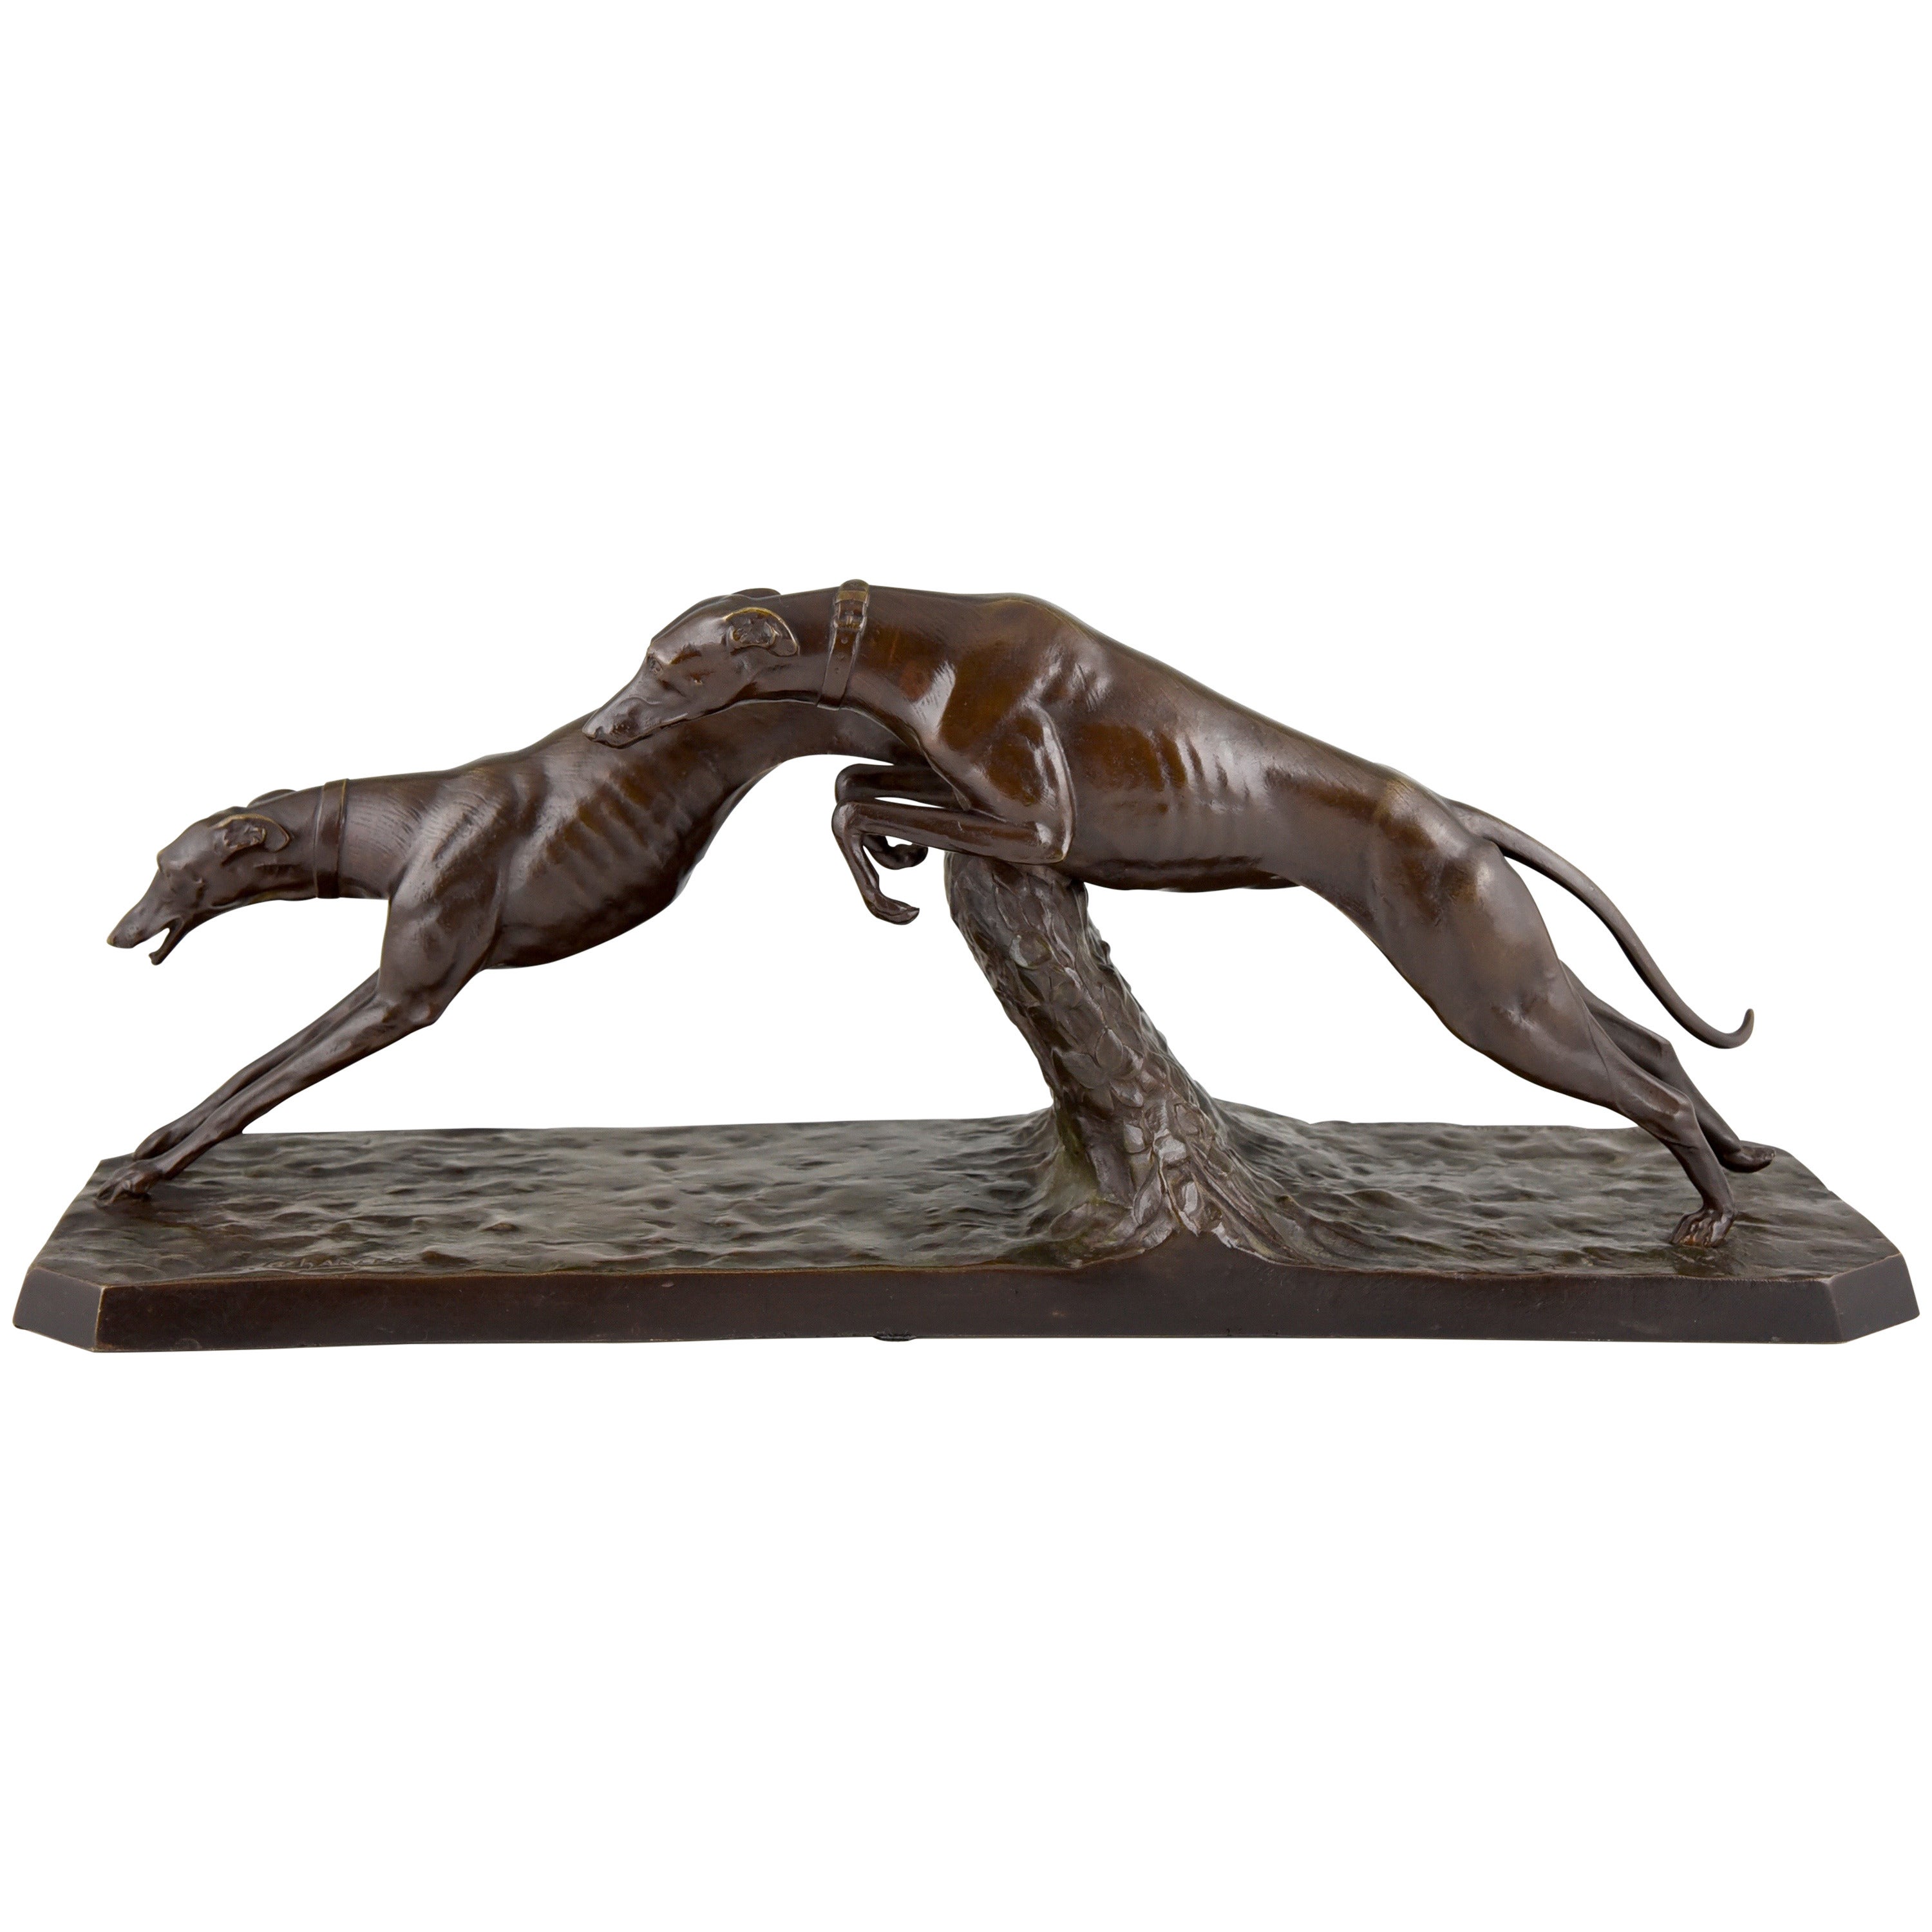 Art Deco Bronze Sculpture Greyhound Dog Racing by Charles, 1930 France